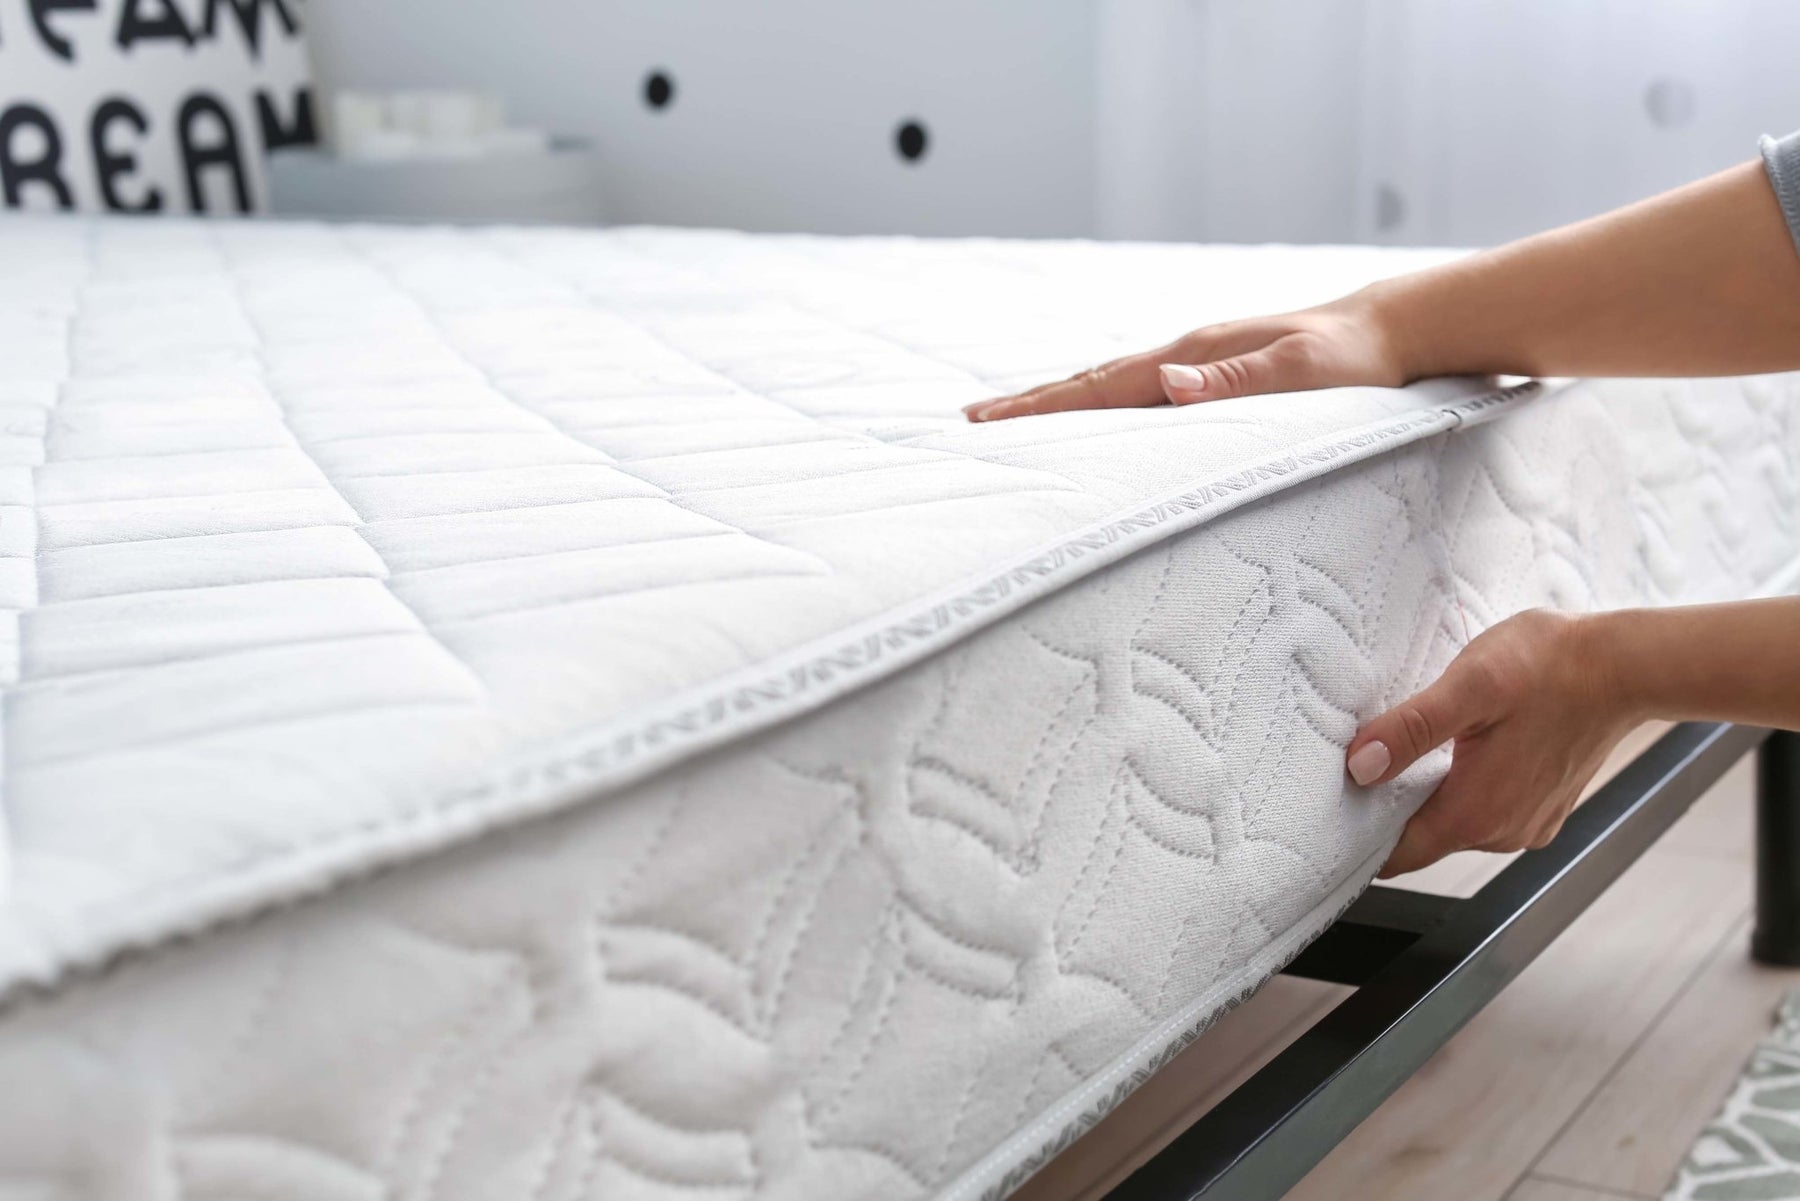 What You Need To Know About Crib Mattresses